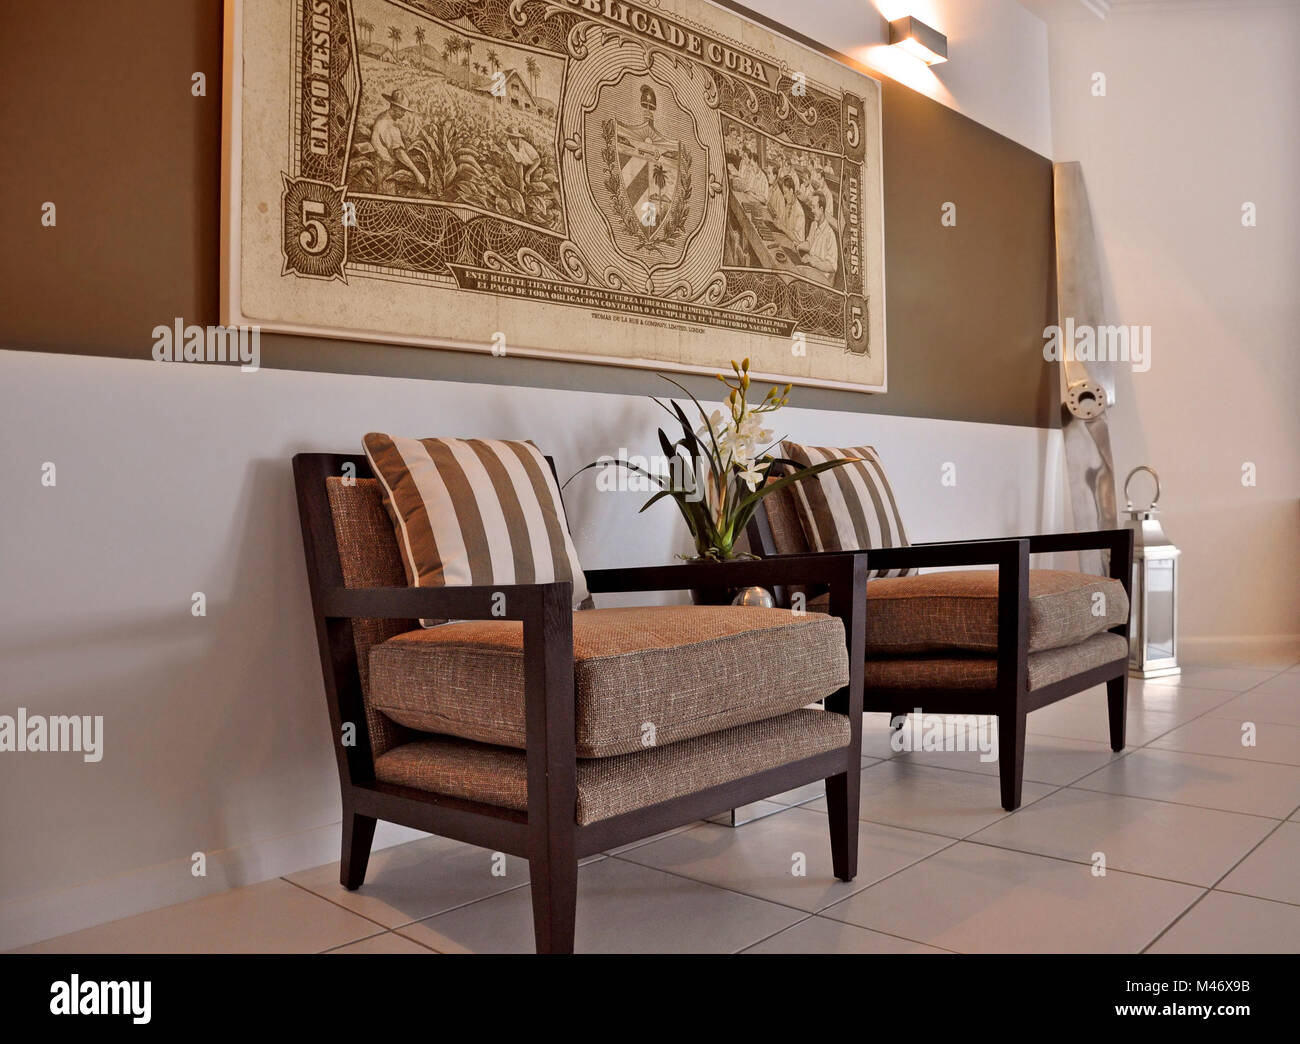 Stylish occasional chairs under a striped feature wall with a cuban currency note enlarged onto a canvas Stock Photo